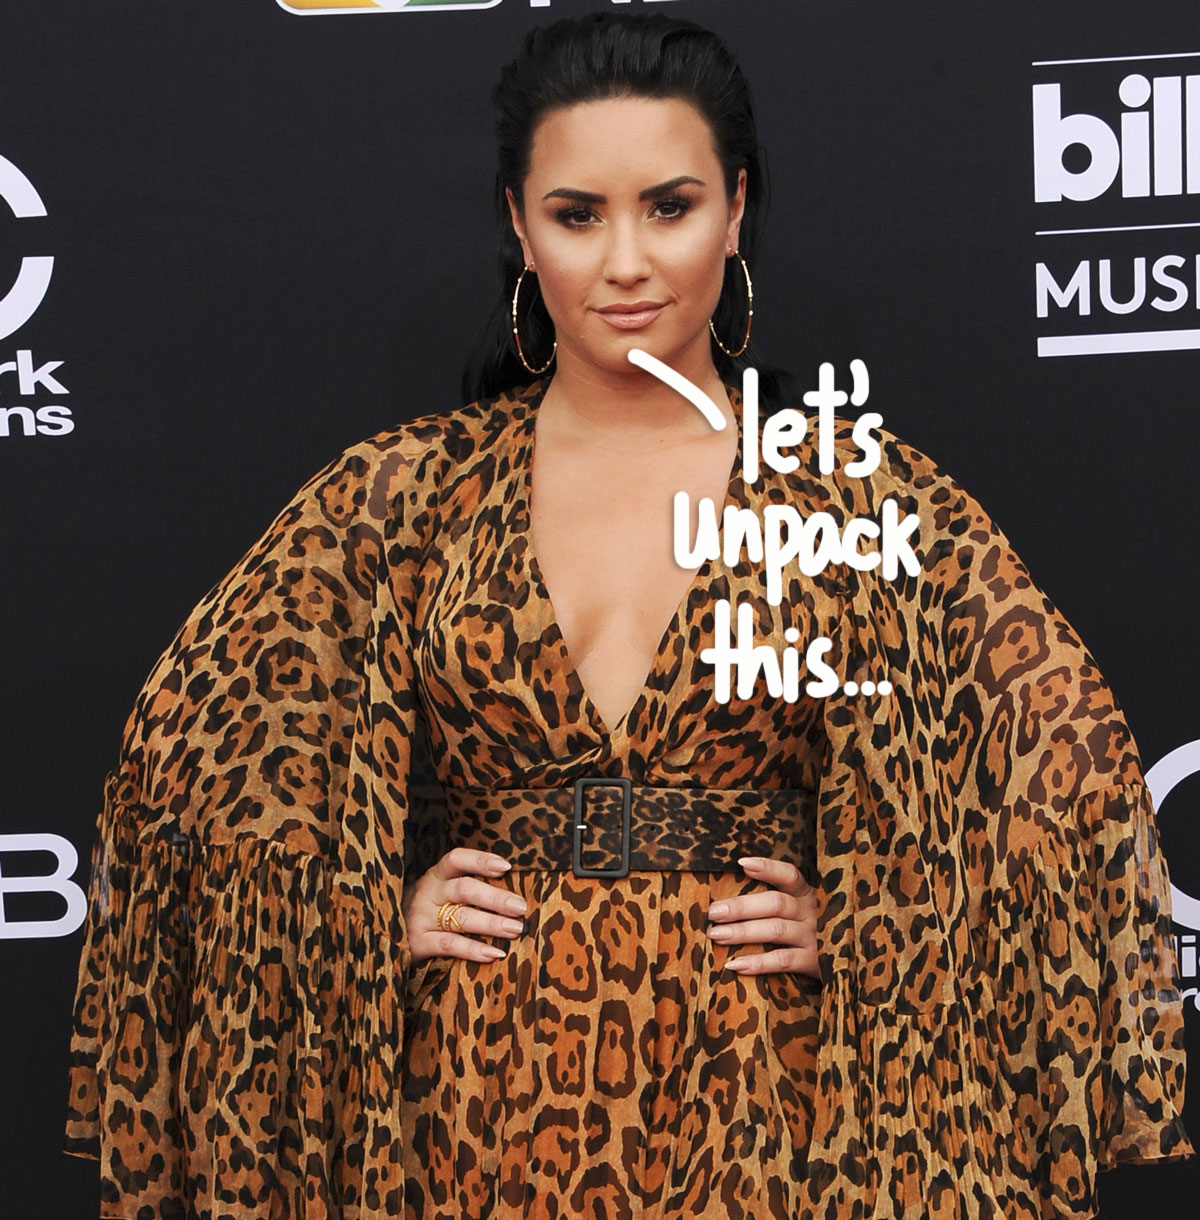 Demi Lovato Gets Real About Returning To Music After Overdose Not Being Friends With Selena